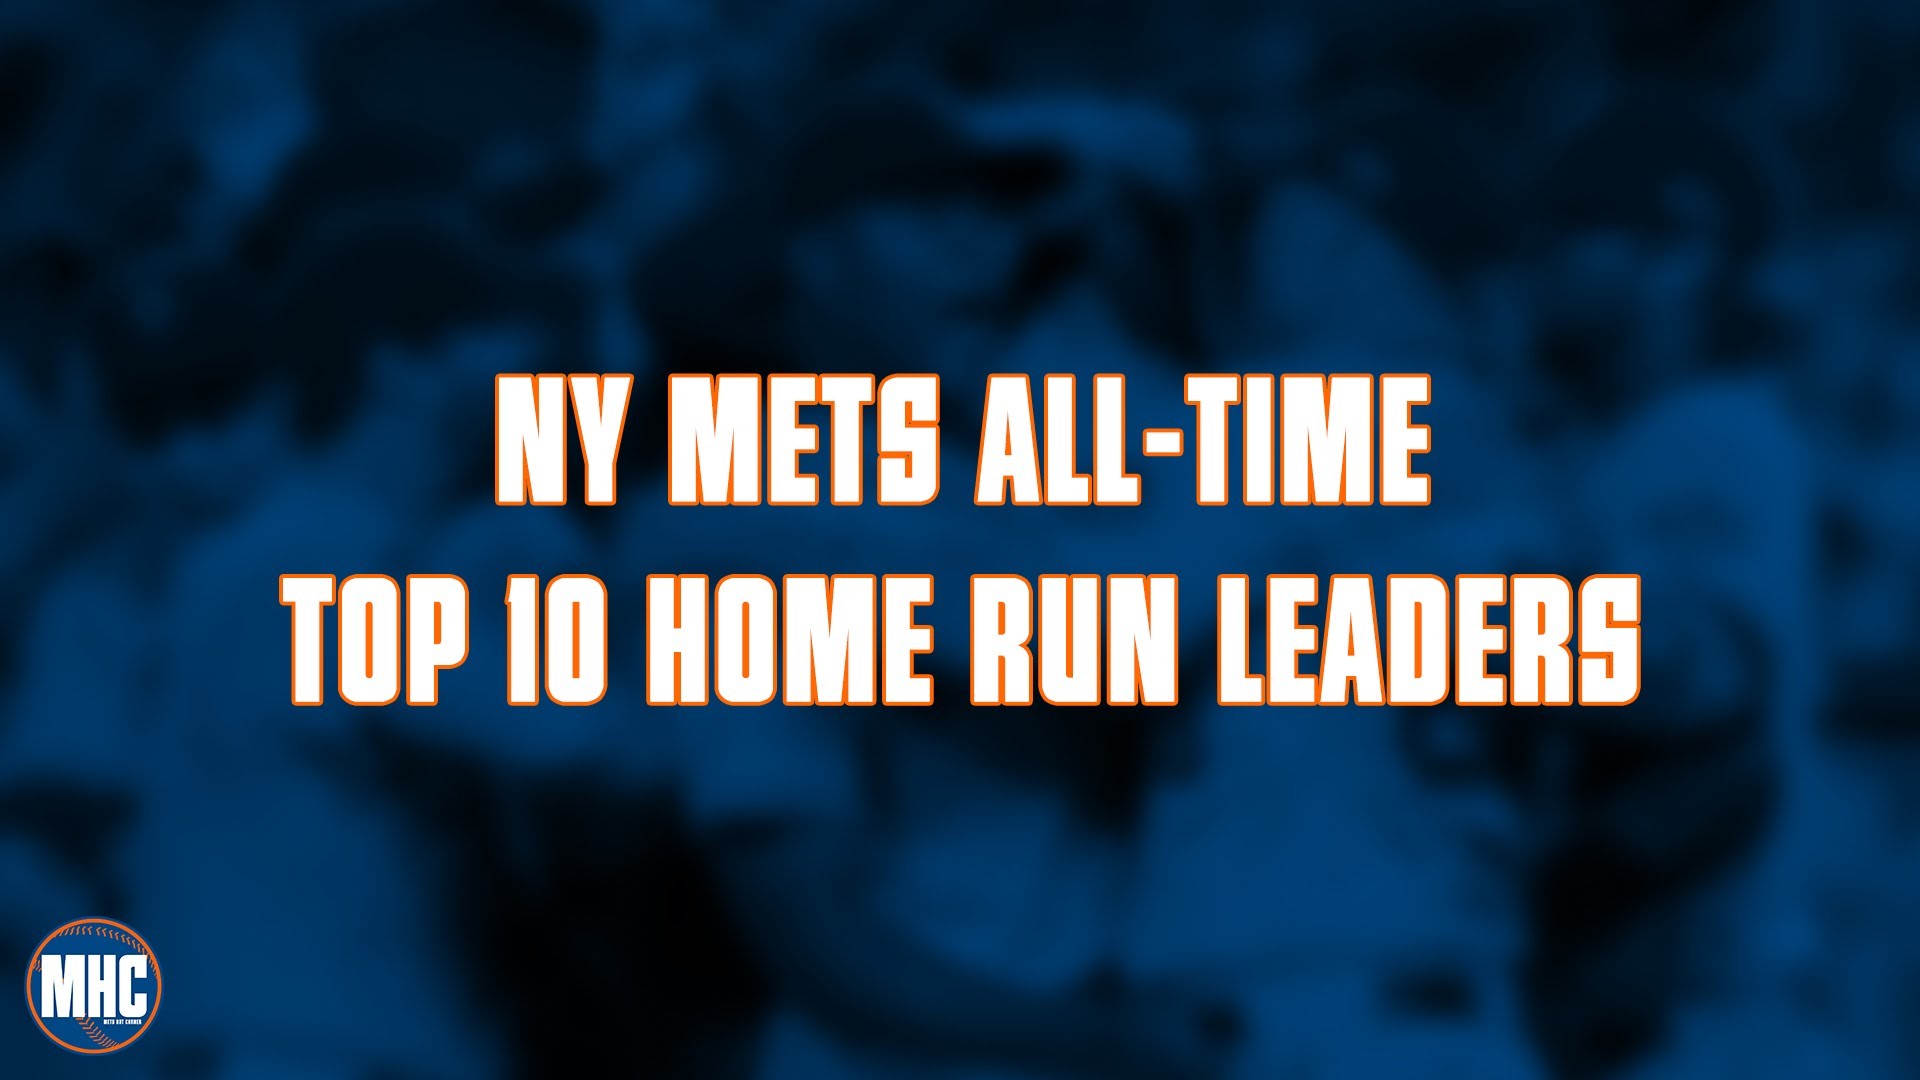 NY Mets All-Time Top 10 Home Run Leaders